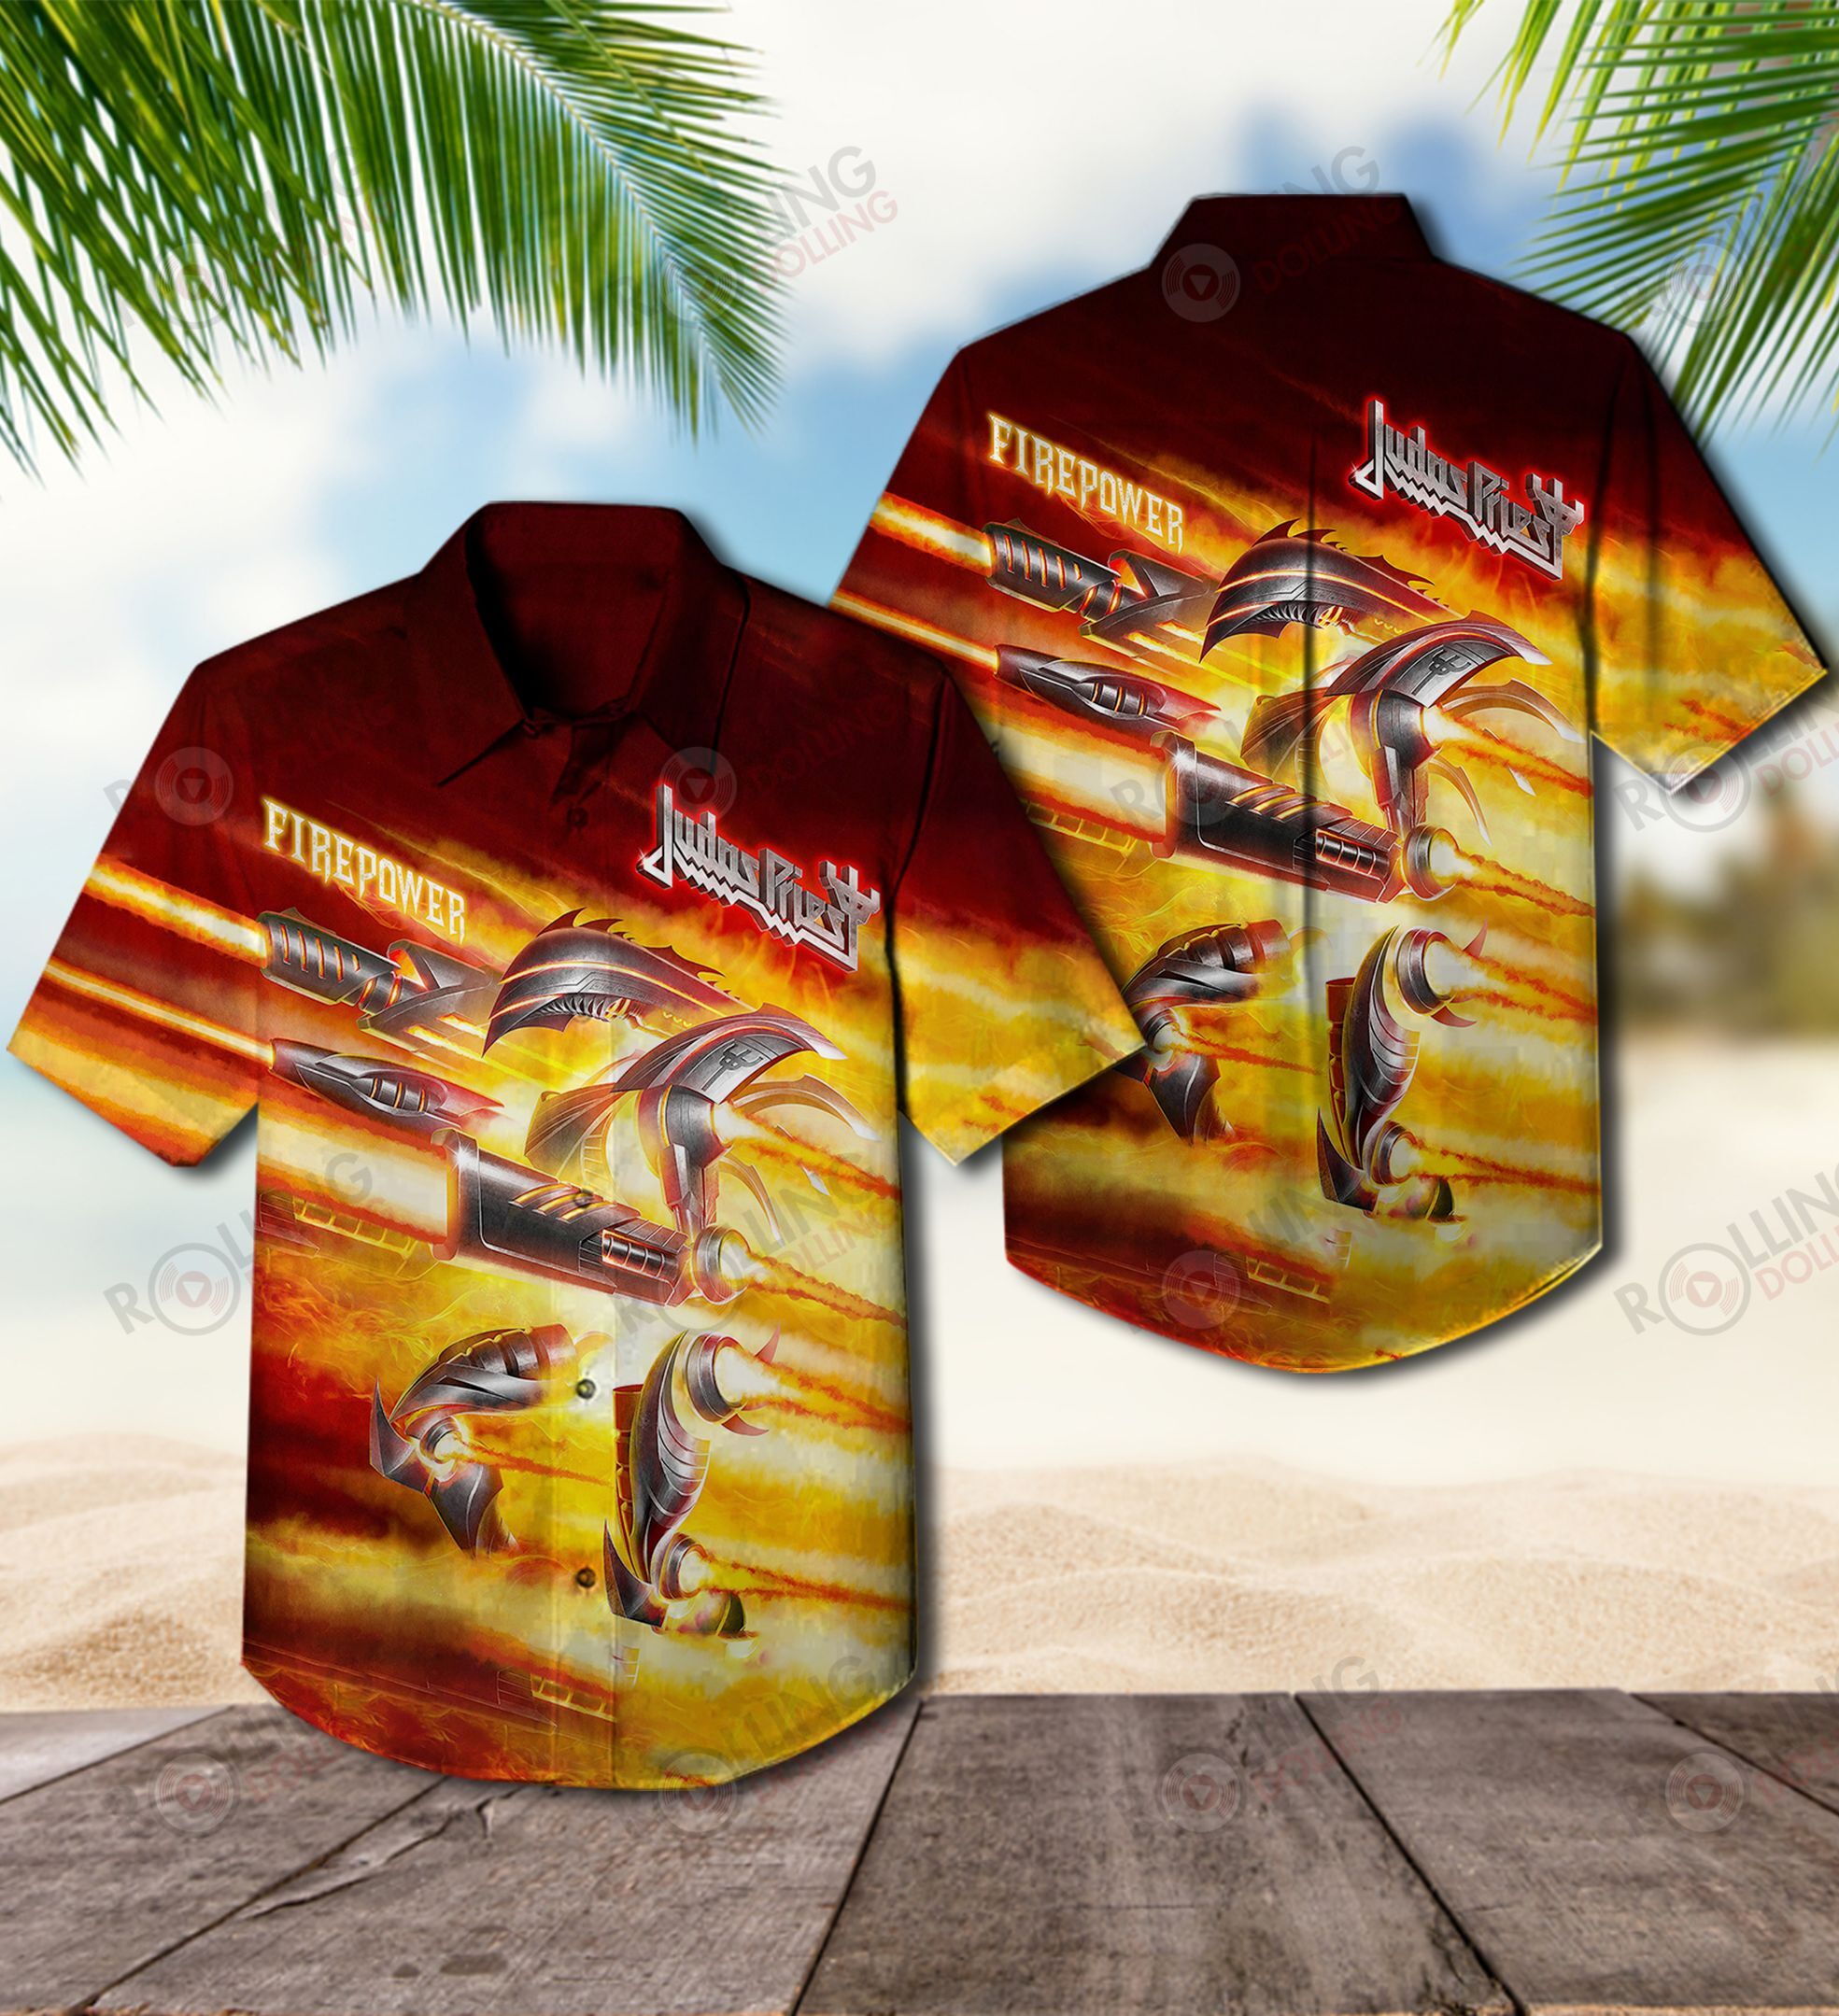 This would make a great gift for any fan who loves Hawaiian Shirt as well as Rock band 123